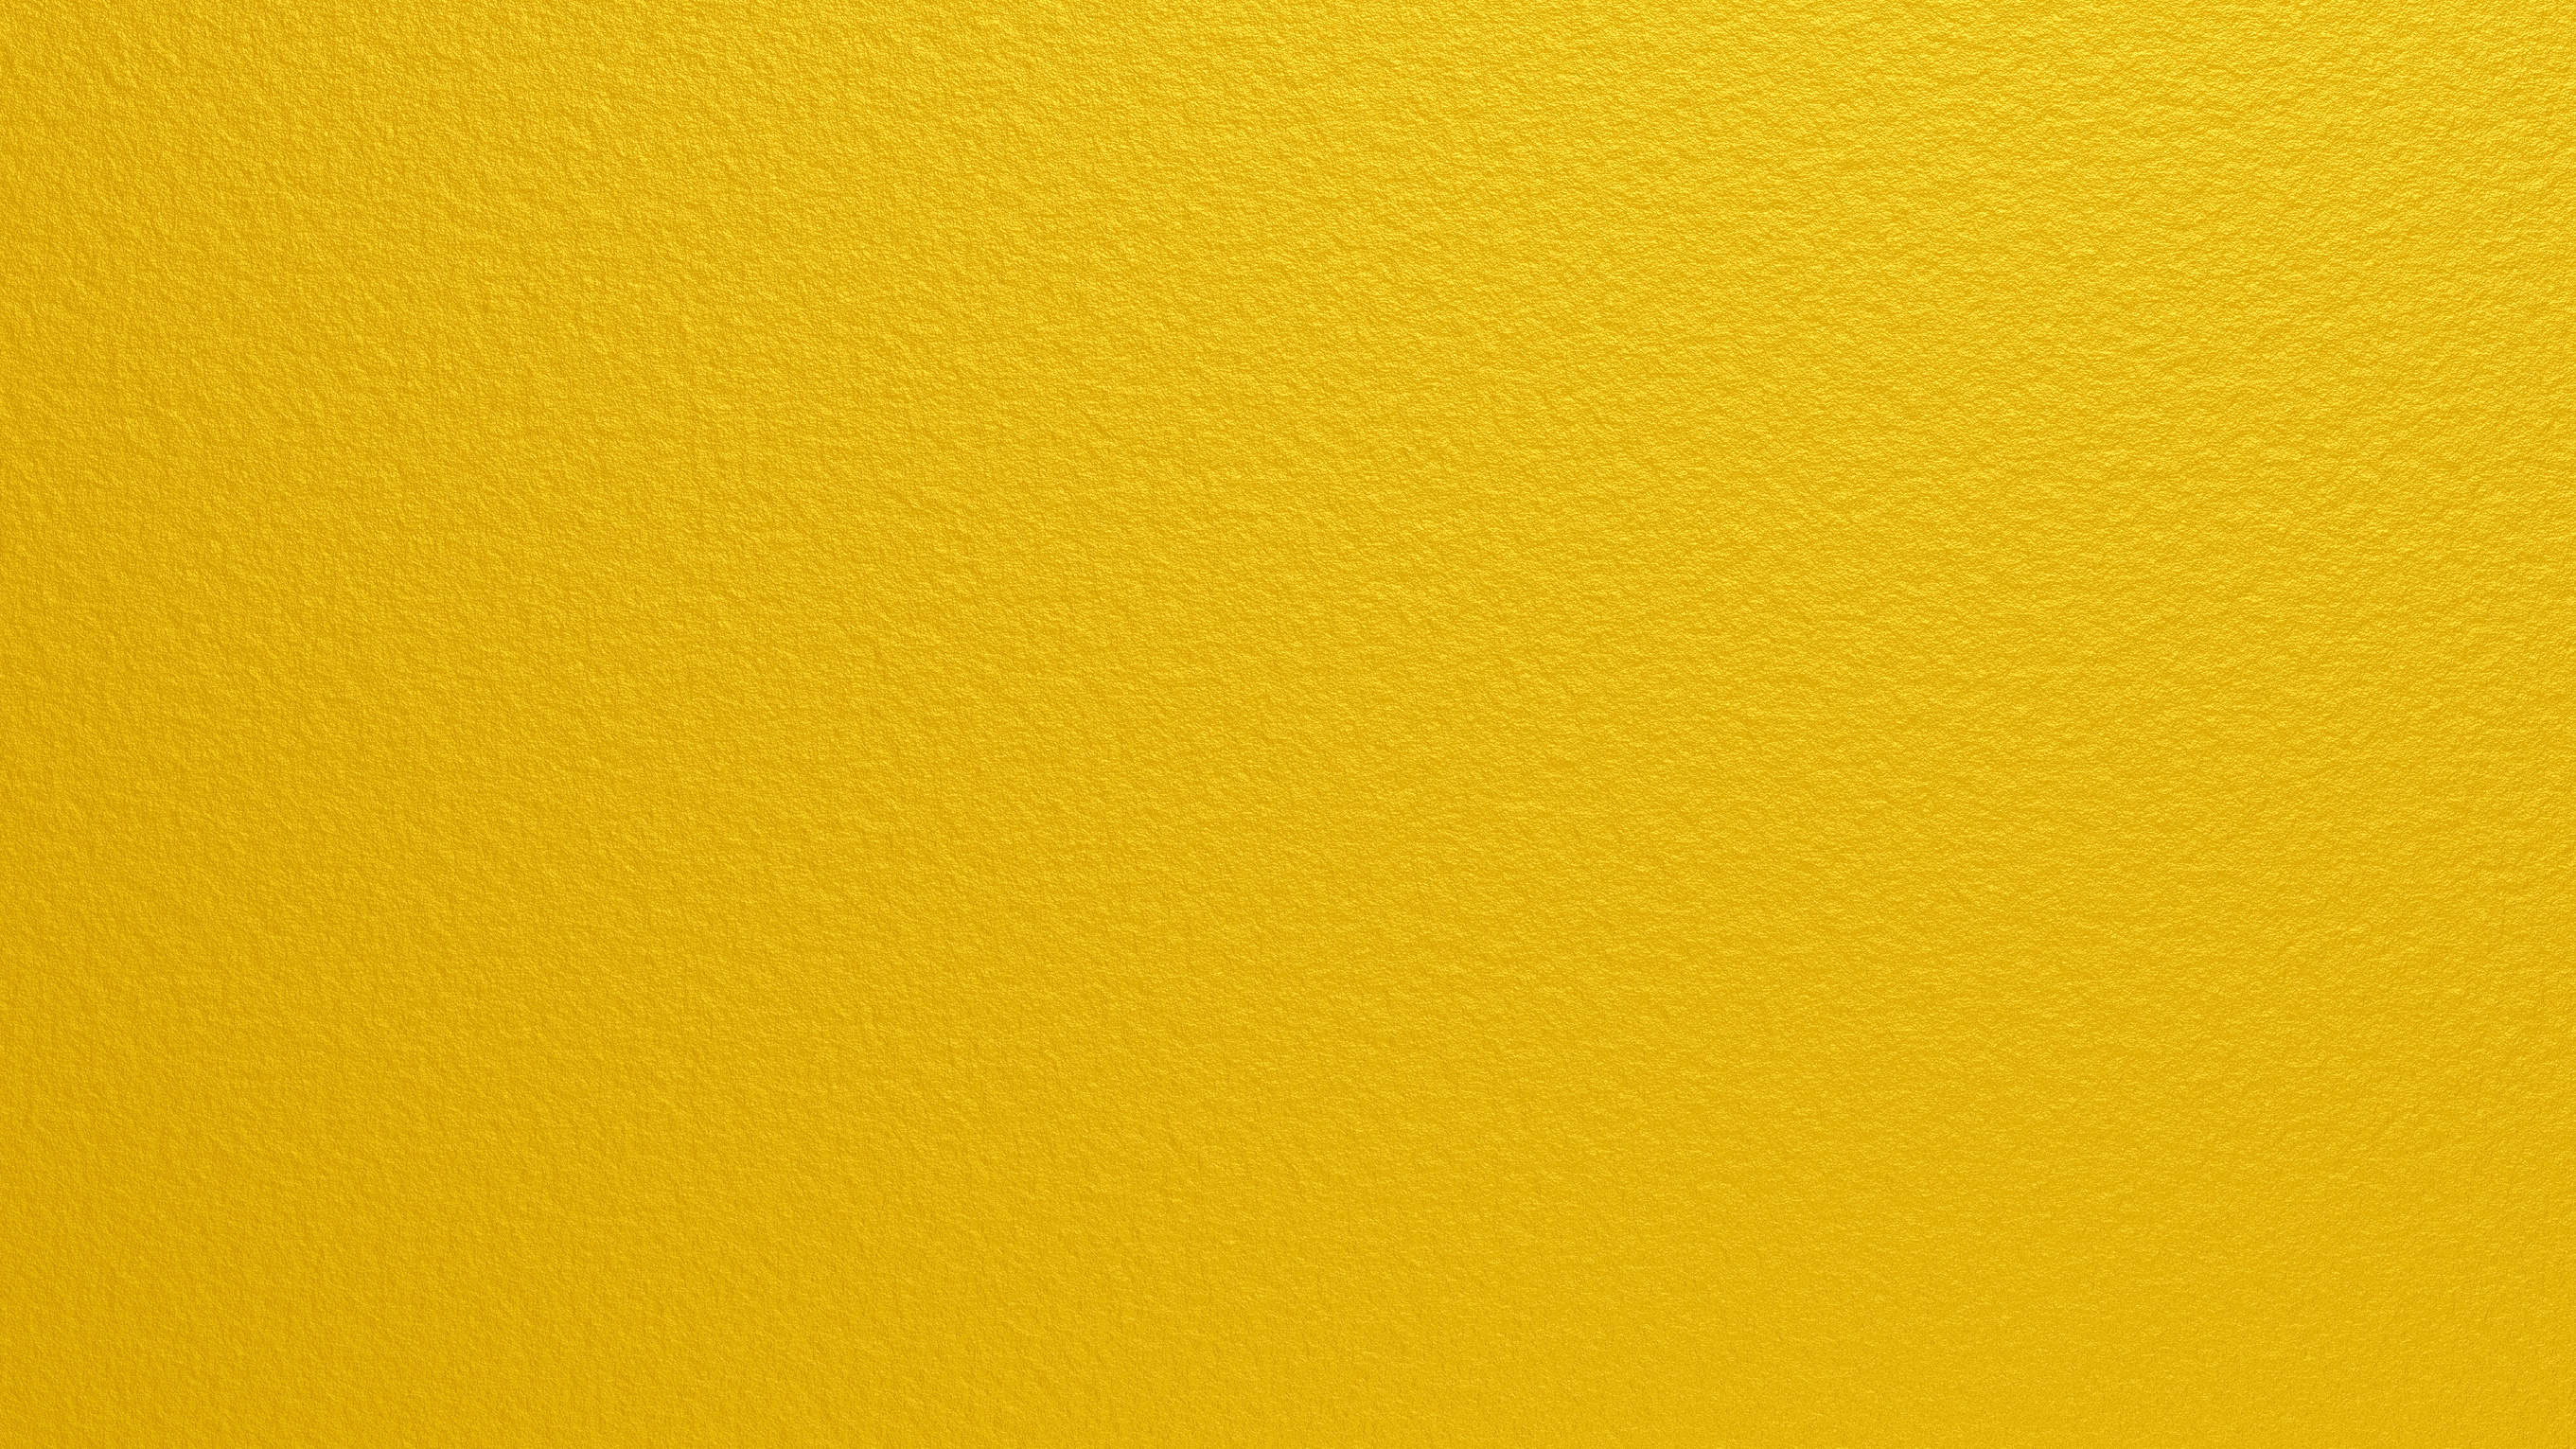 Golden background texture material. Japanese style Japanese style.